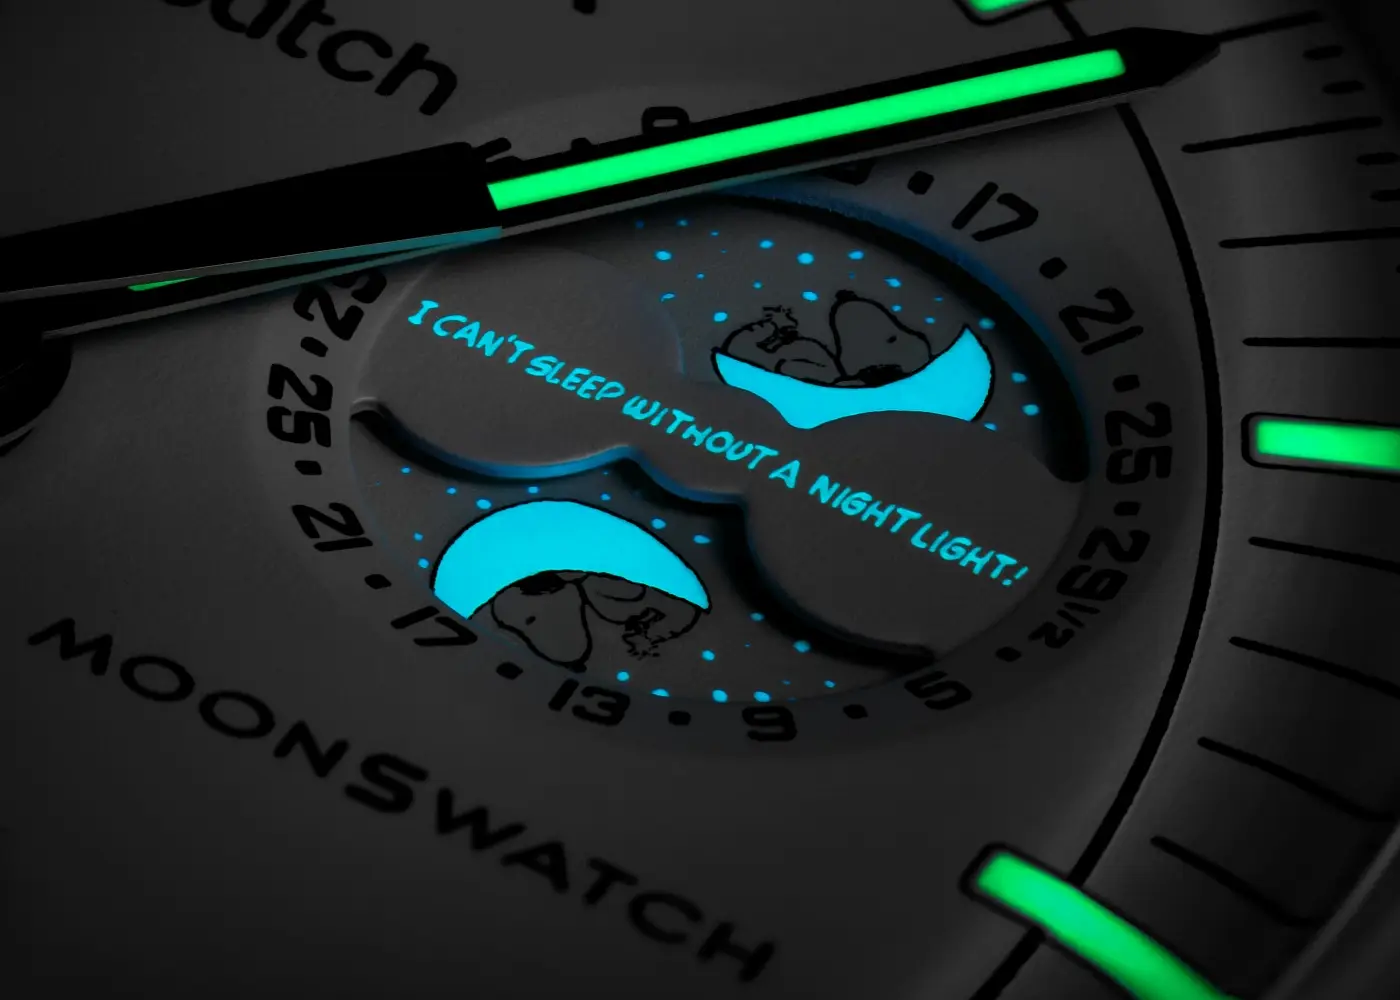 Omega x Swatch Moonswatch Mission to the Moonphase